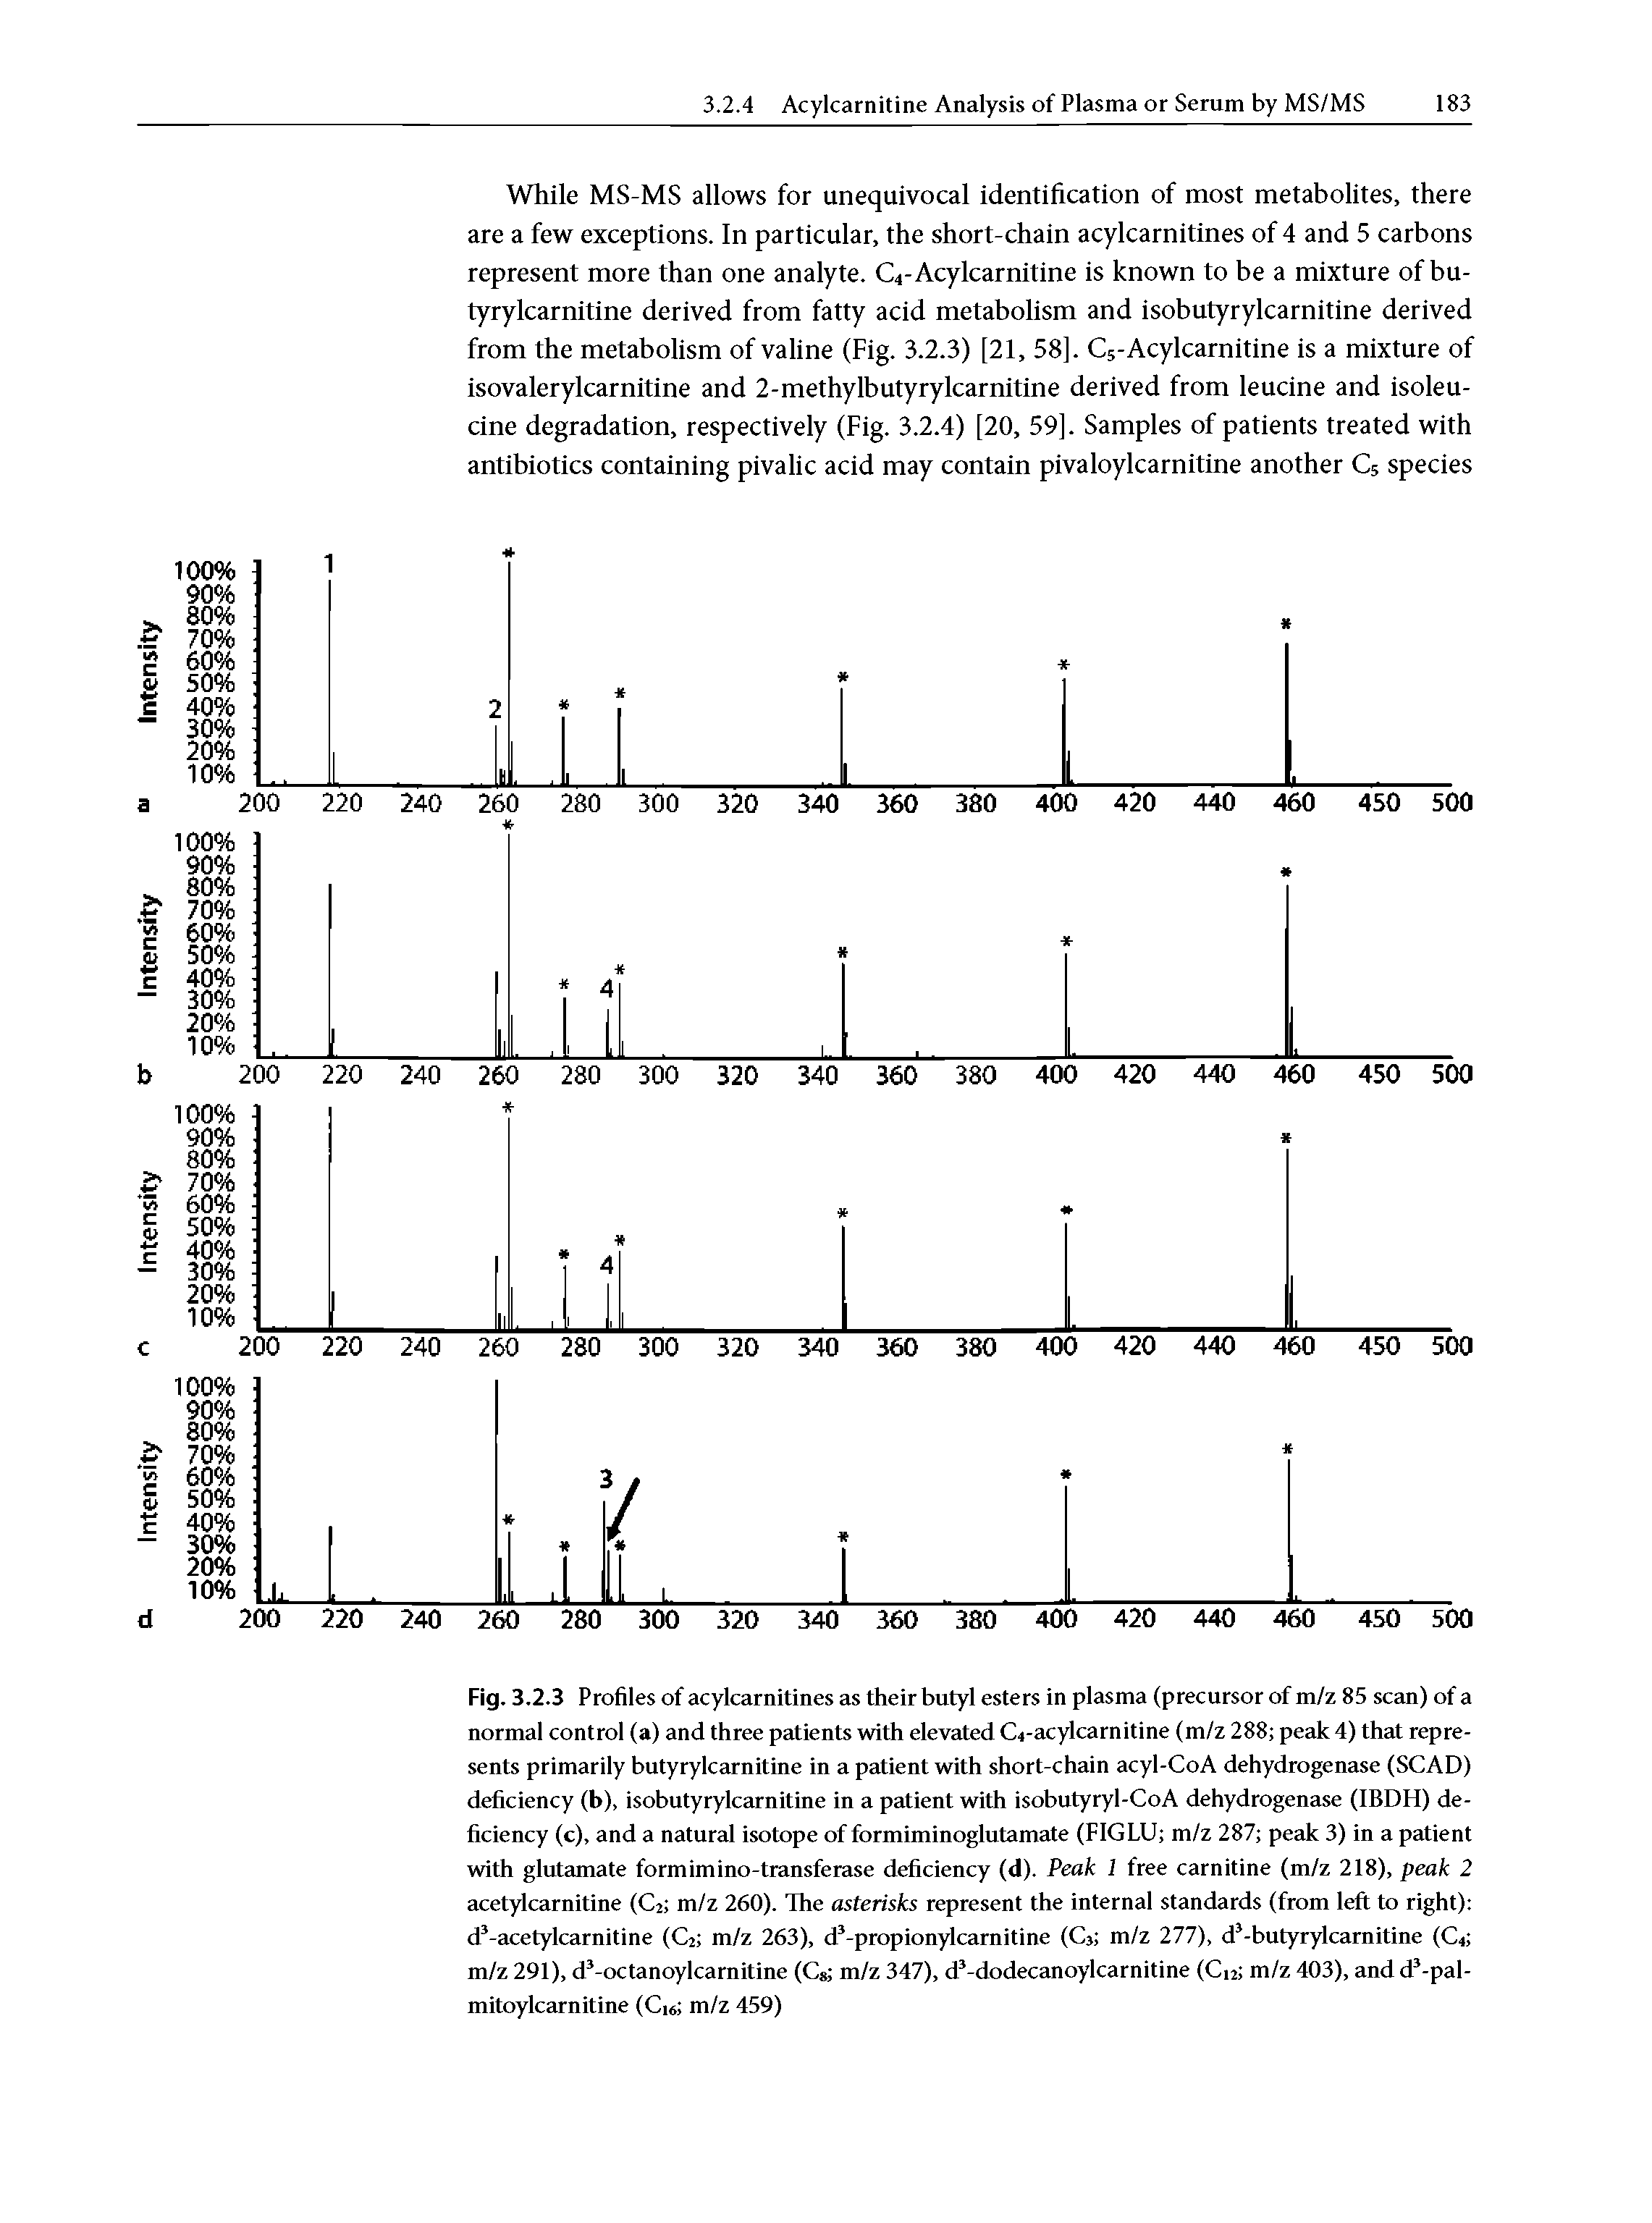 Fig. 3.2.3 Profiles of acylcarnitines as their butyl esters in plasma (precursor of m/z 85 scan) of a normal control (a) and three patients with elevated Gi-acyl carnitine (m/z 288 peak 4) that represents primarily butyrylcarnitine in a patient with short-chain acyl-CoA dehydrogenase (SCAD) deficiency (b), isobutyrylcarnitine in a patient with isobutyryl-CoA dehydrogenase (IBDH) deficiency (c), and a natural isotope of formiminoglutamate (FIGLU m/z 287 peak 3) in a patient with glutamate formimino-transferase deficiency (d). Peak 1 free carnitine (m/z 218), peak 2 acetylcarnitine (C2 m/z 260). The asterisks represent the internal standards (from left to right) d3-acetylcarnitine (C2 m/z 263), d3-propionylcarnitine (C3 m/z 277), d3-butyrylcarnitine (C4 m/z 291), d3-octanoylcarnitine (C8 m/z 347), d3-dodecanoylcarnitine (Ci, m/z 403), and d3-pal-mitoylcarnitine (Ci6 m/z 459)...